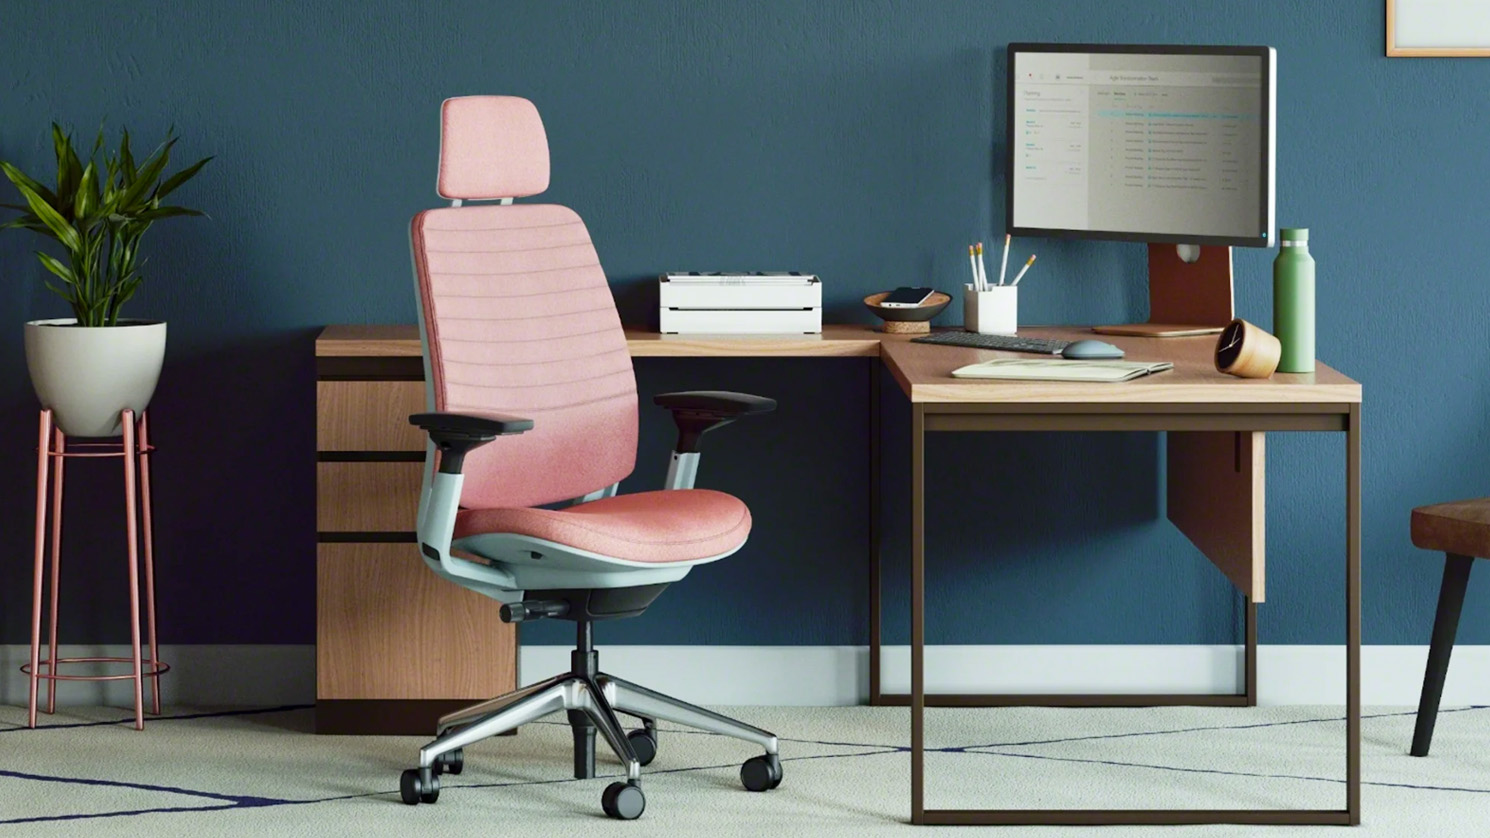 steelcase series 2 office chair review